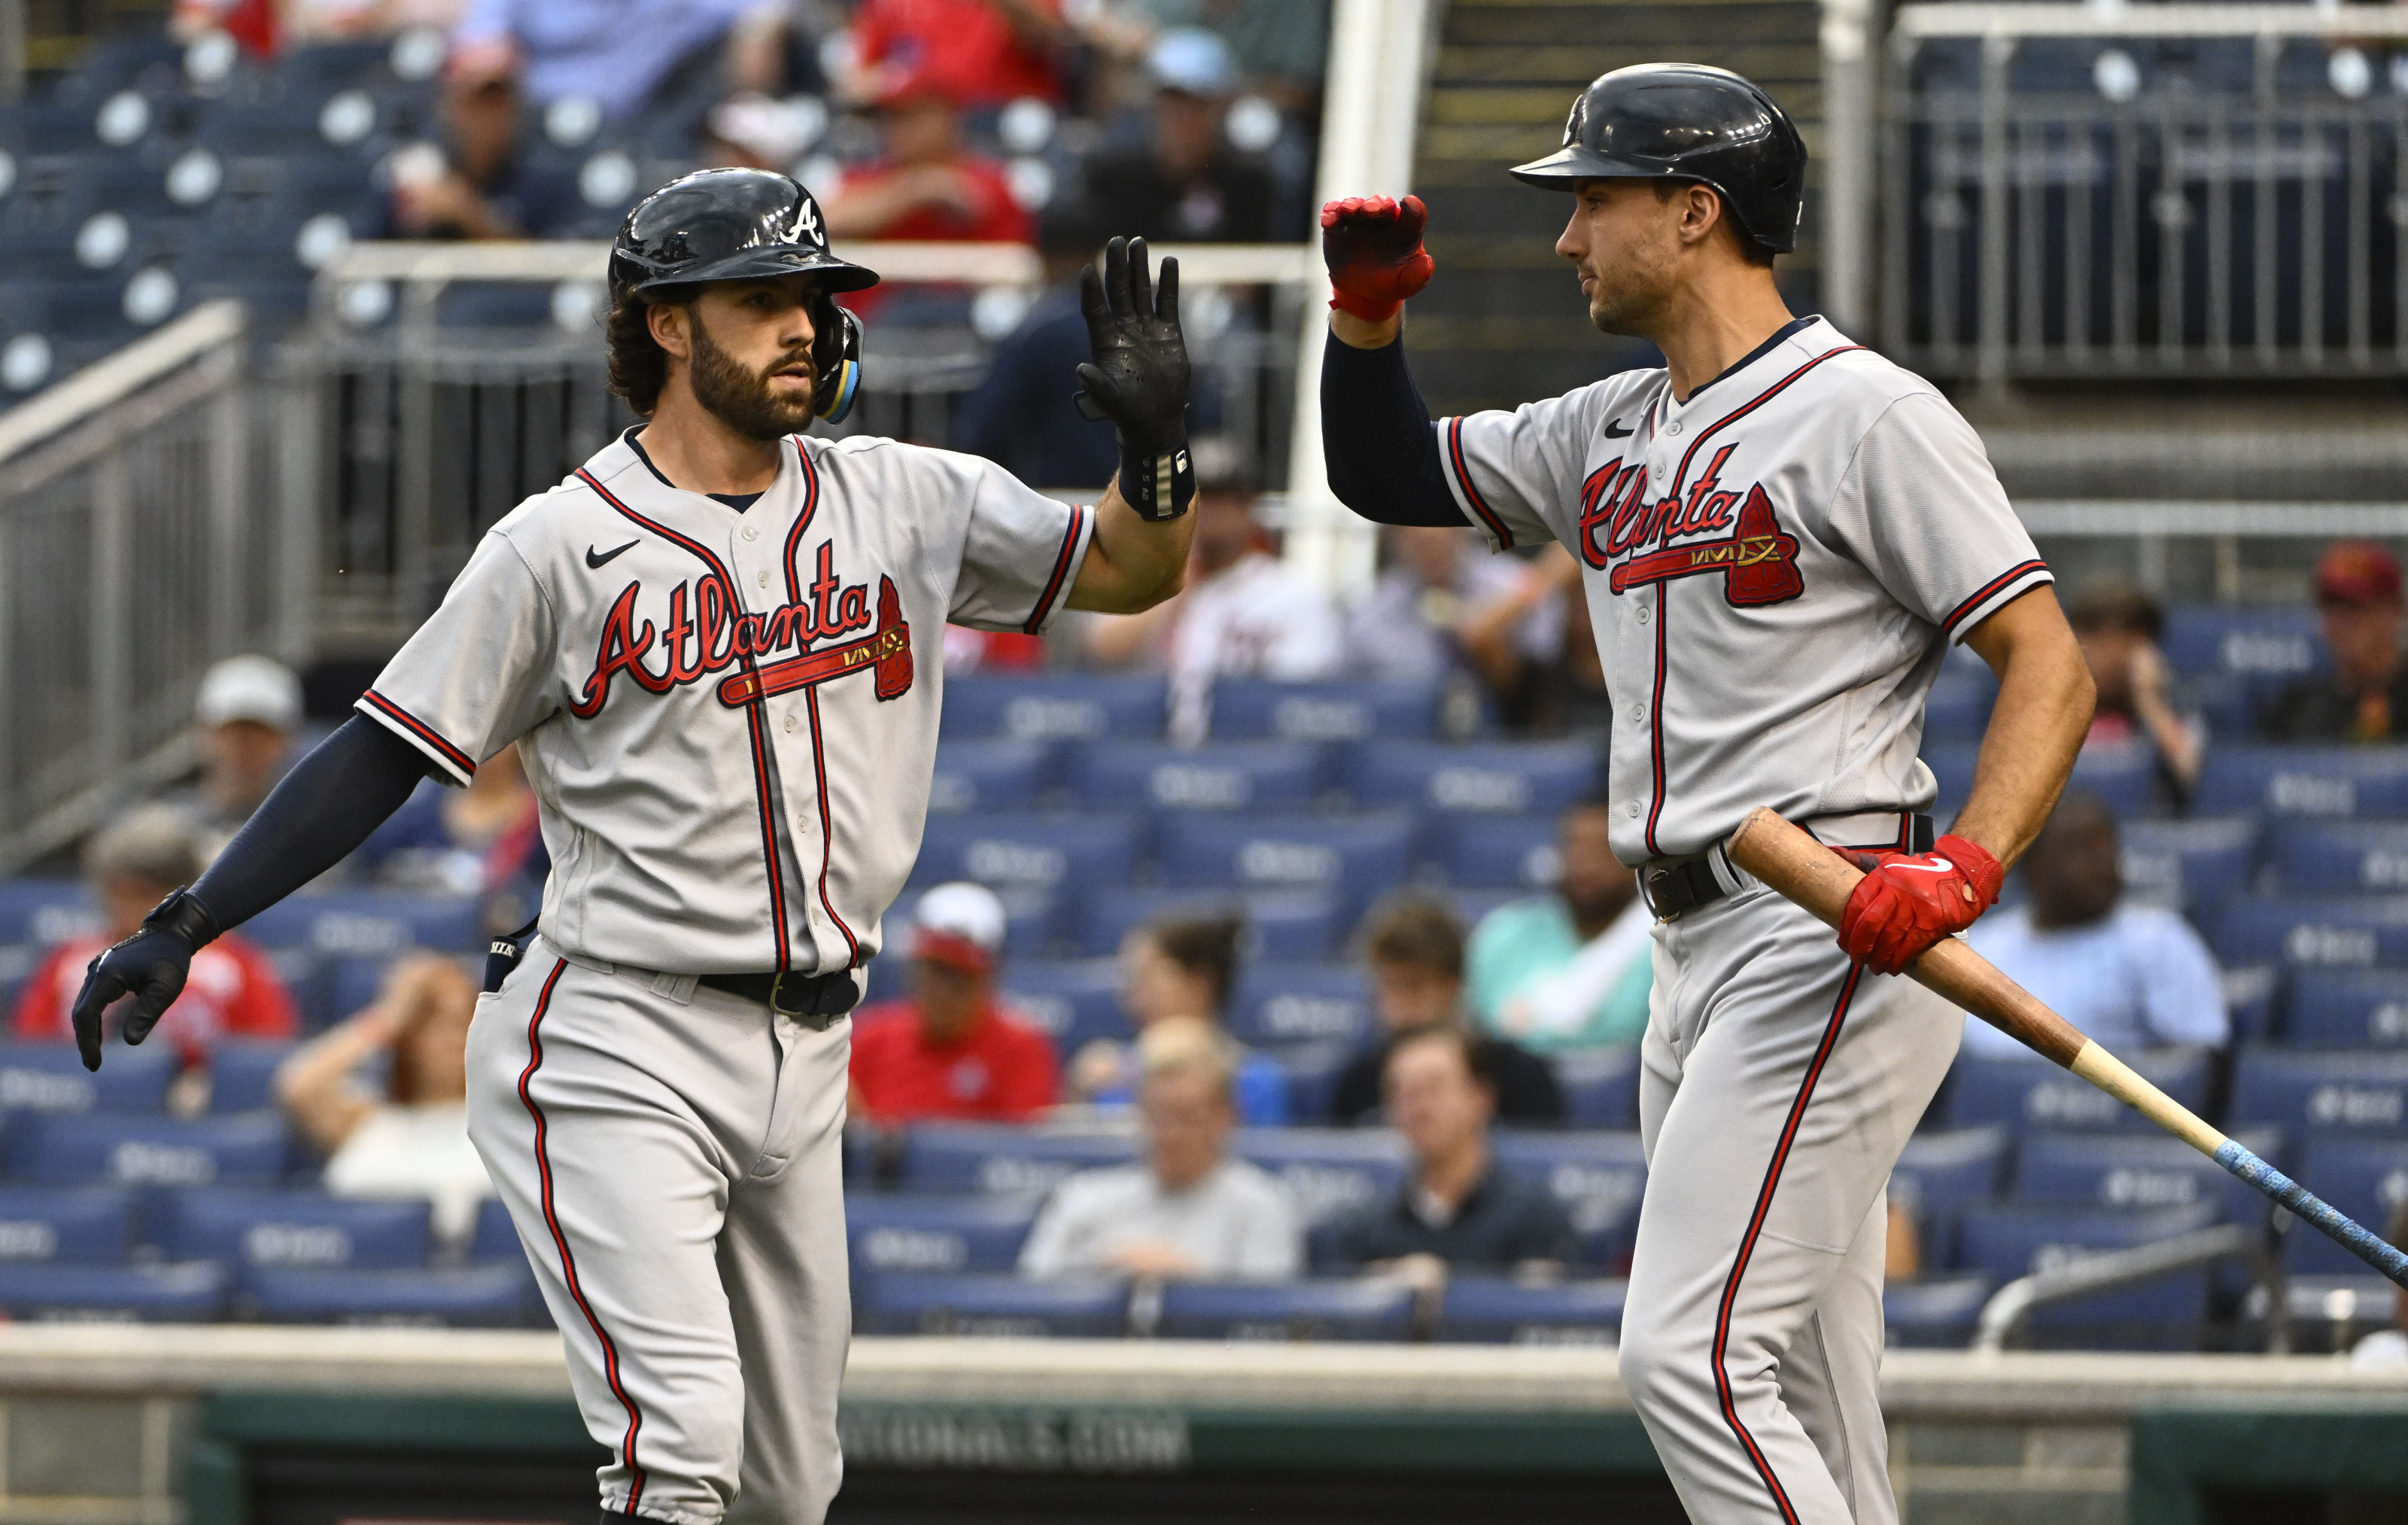 WATCH: Dansby Swanson Homers In Spring Training As Outfielders